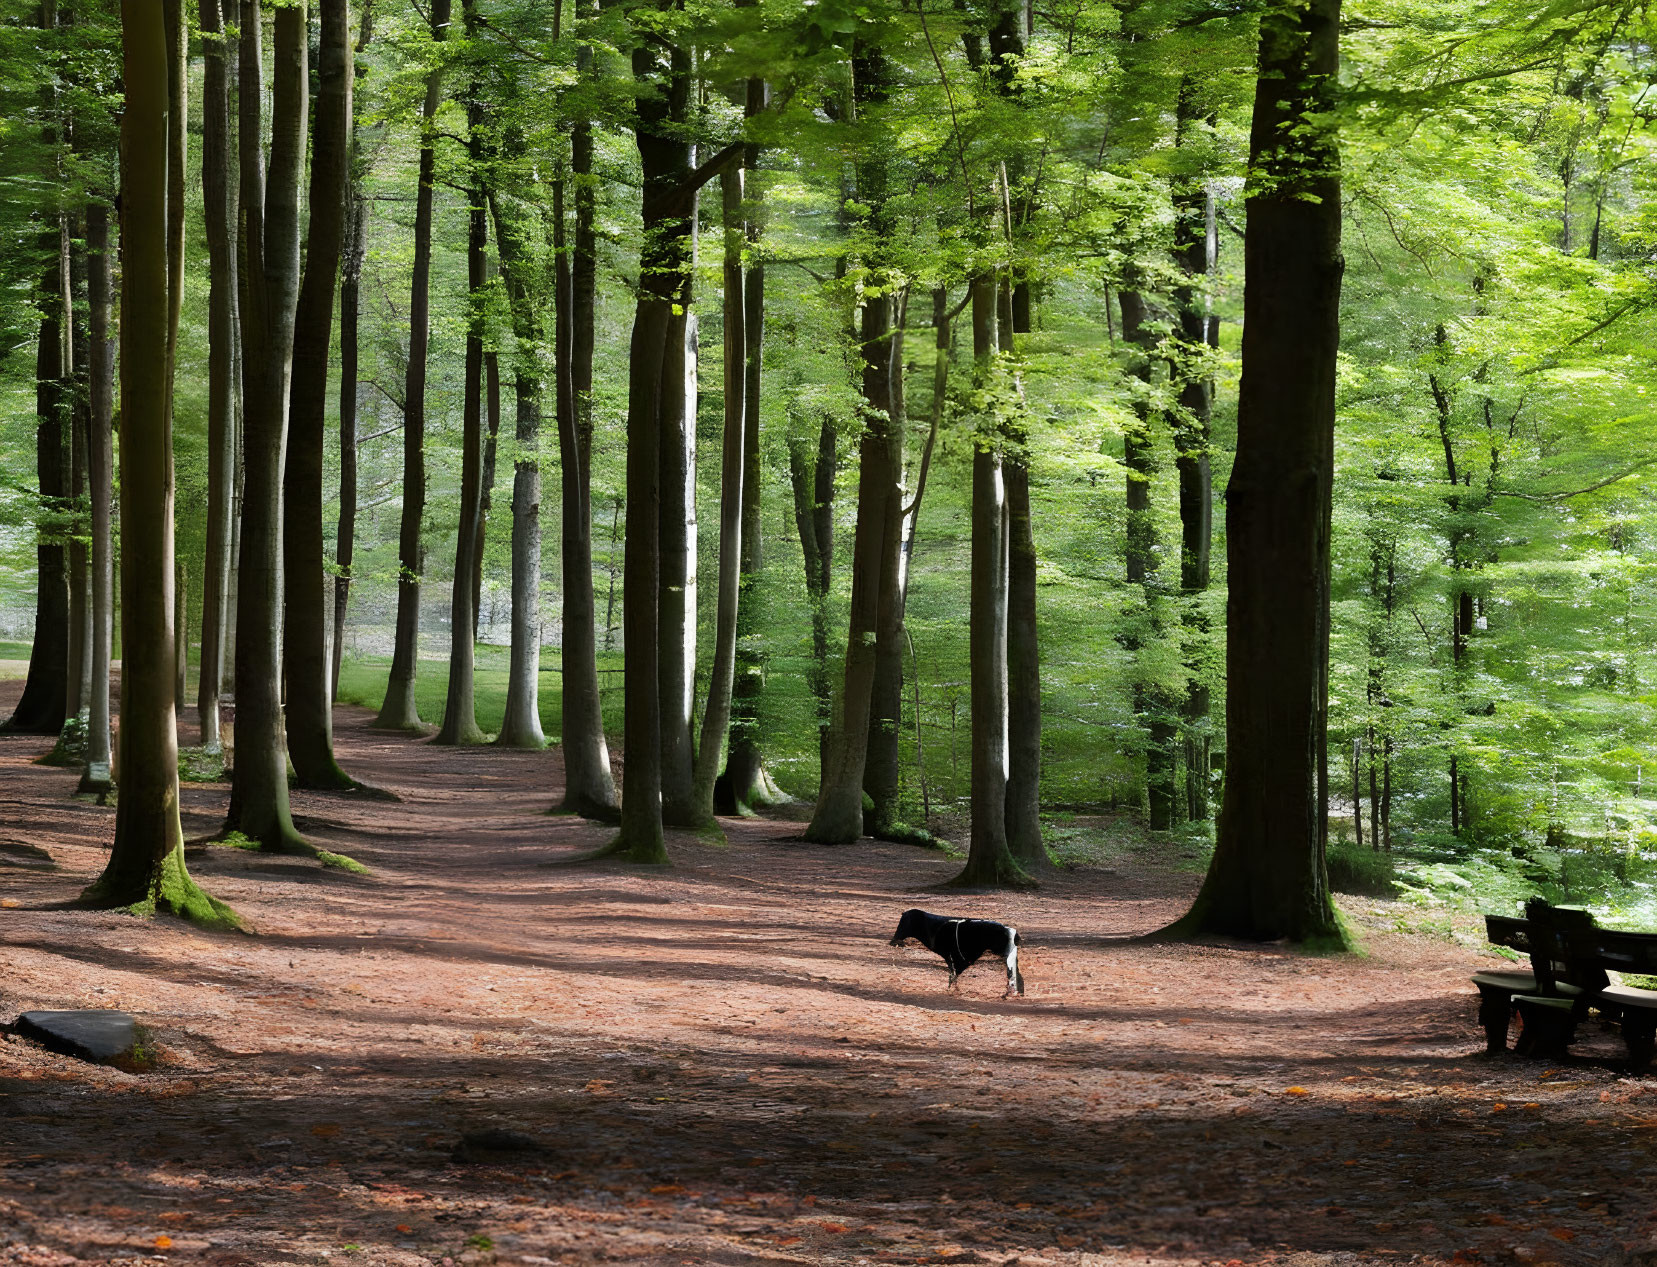 Black Dog Walking Through Tranquil Forest with Benches